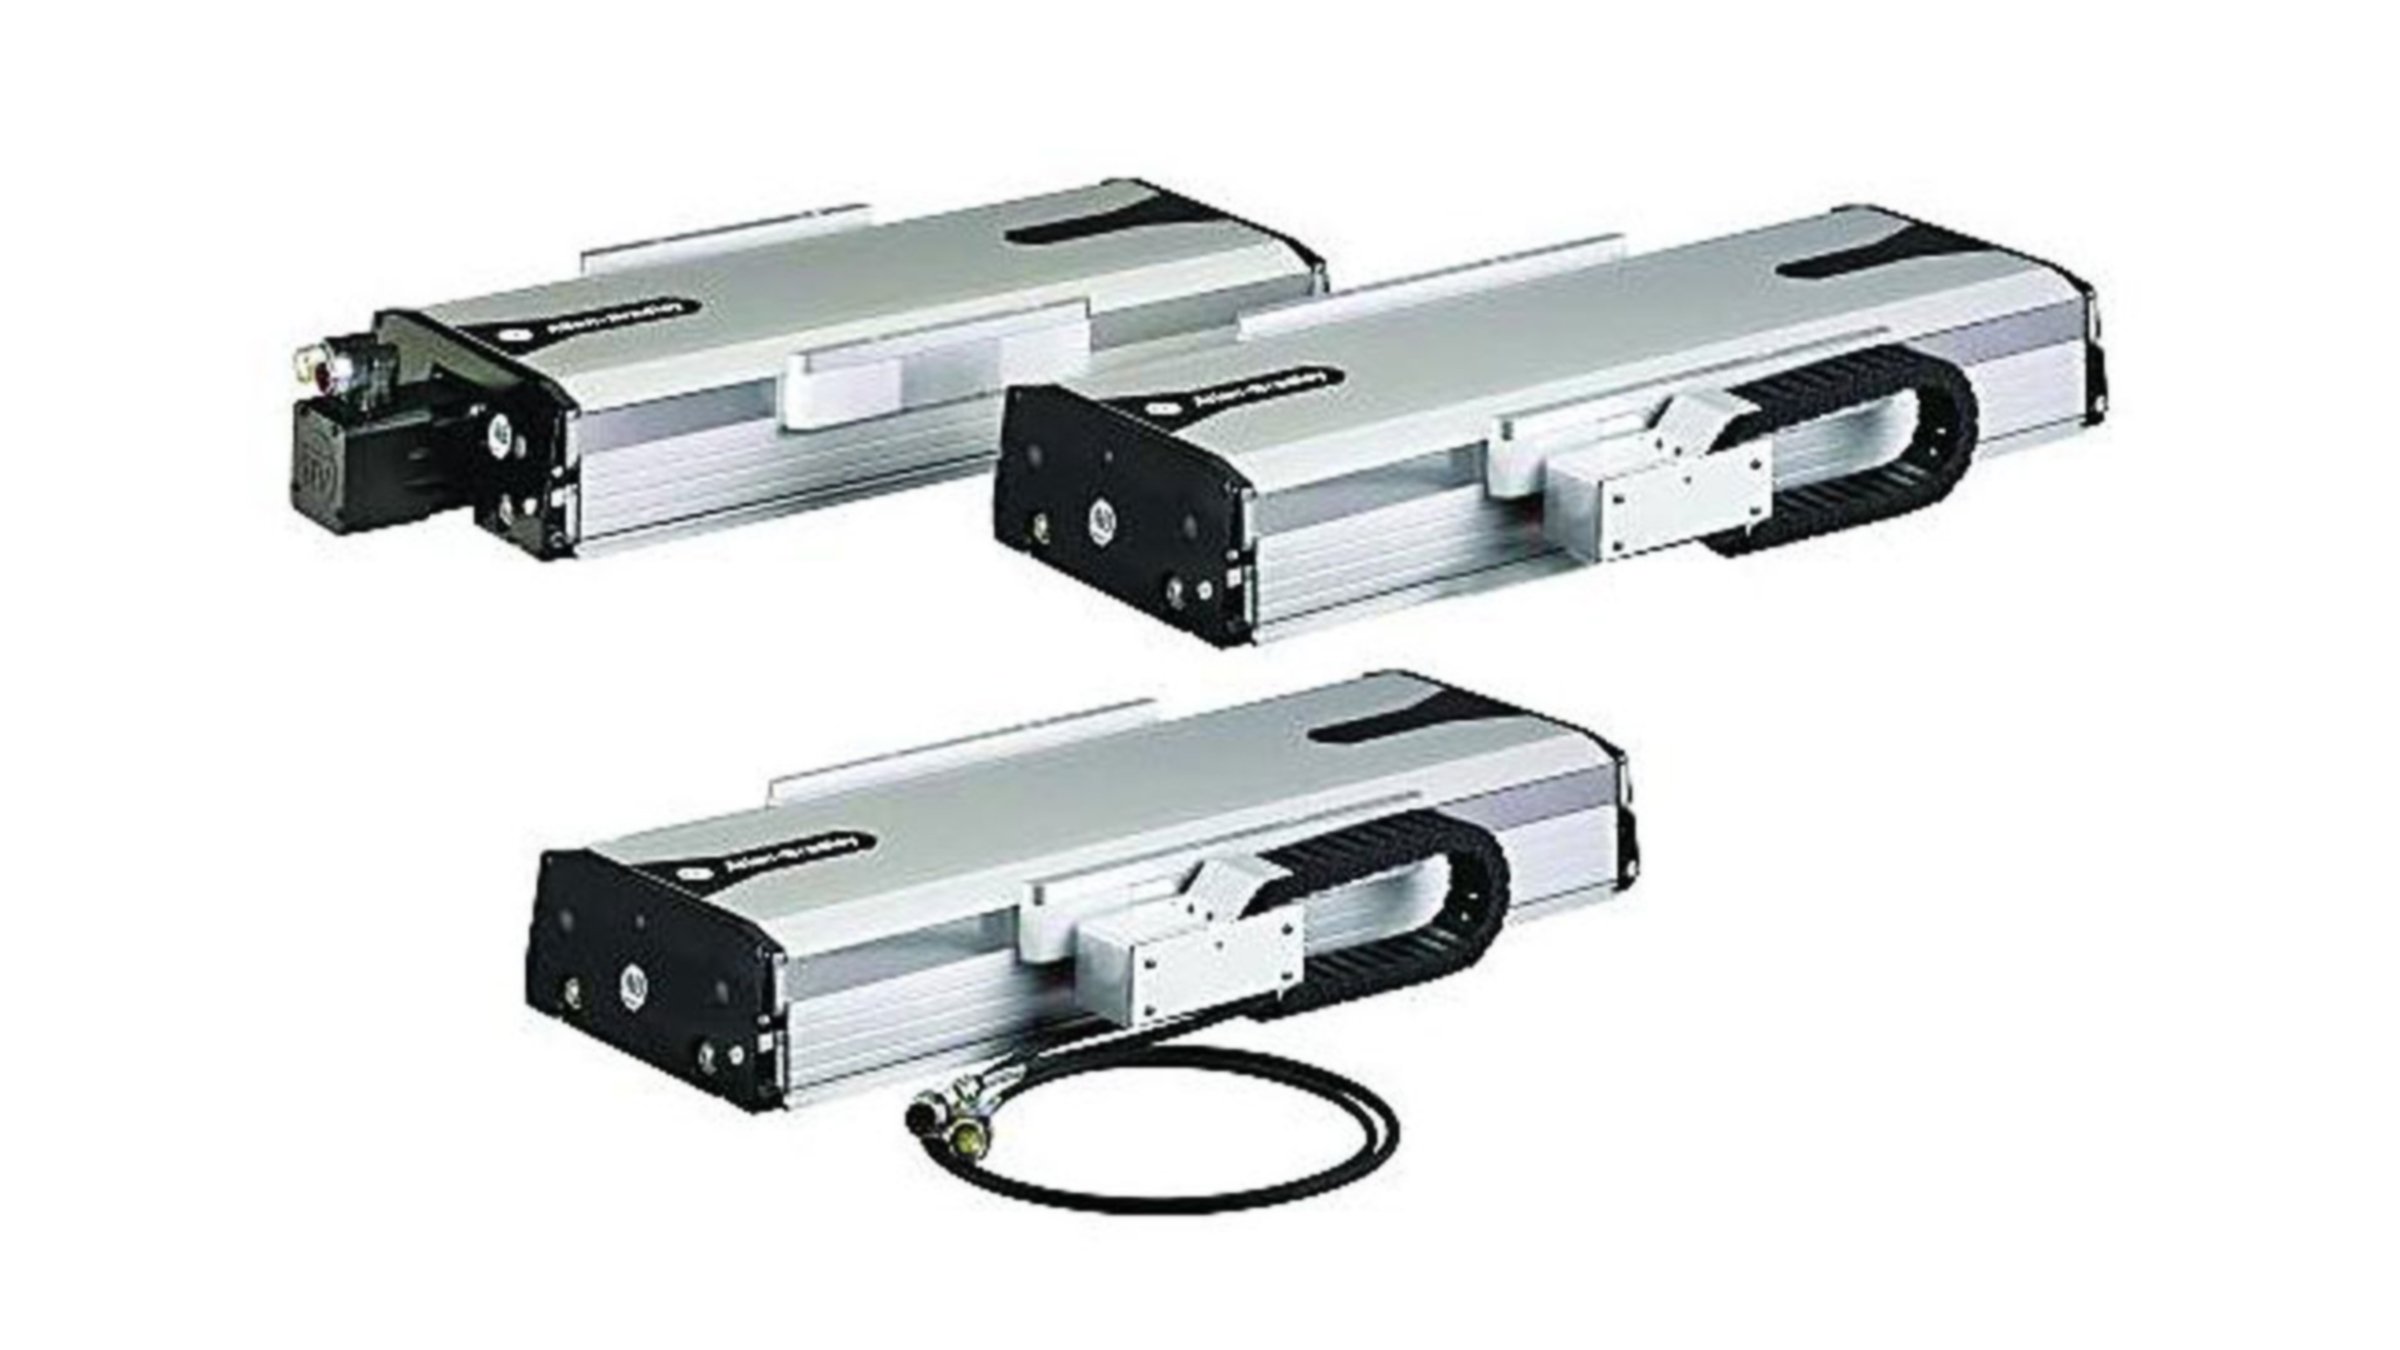 Allen-Bradley Bulletin MPAS MP-Series™ Integrated Linear Stages can support heavy loads and tolerate moment loads.